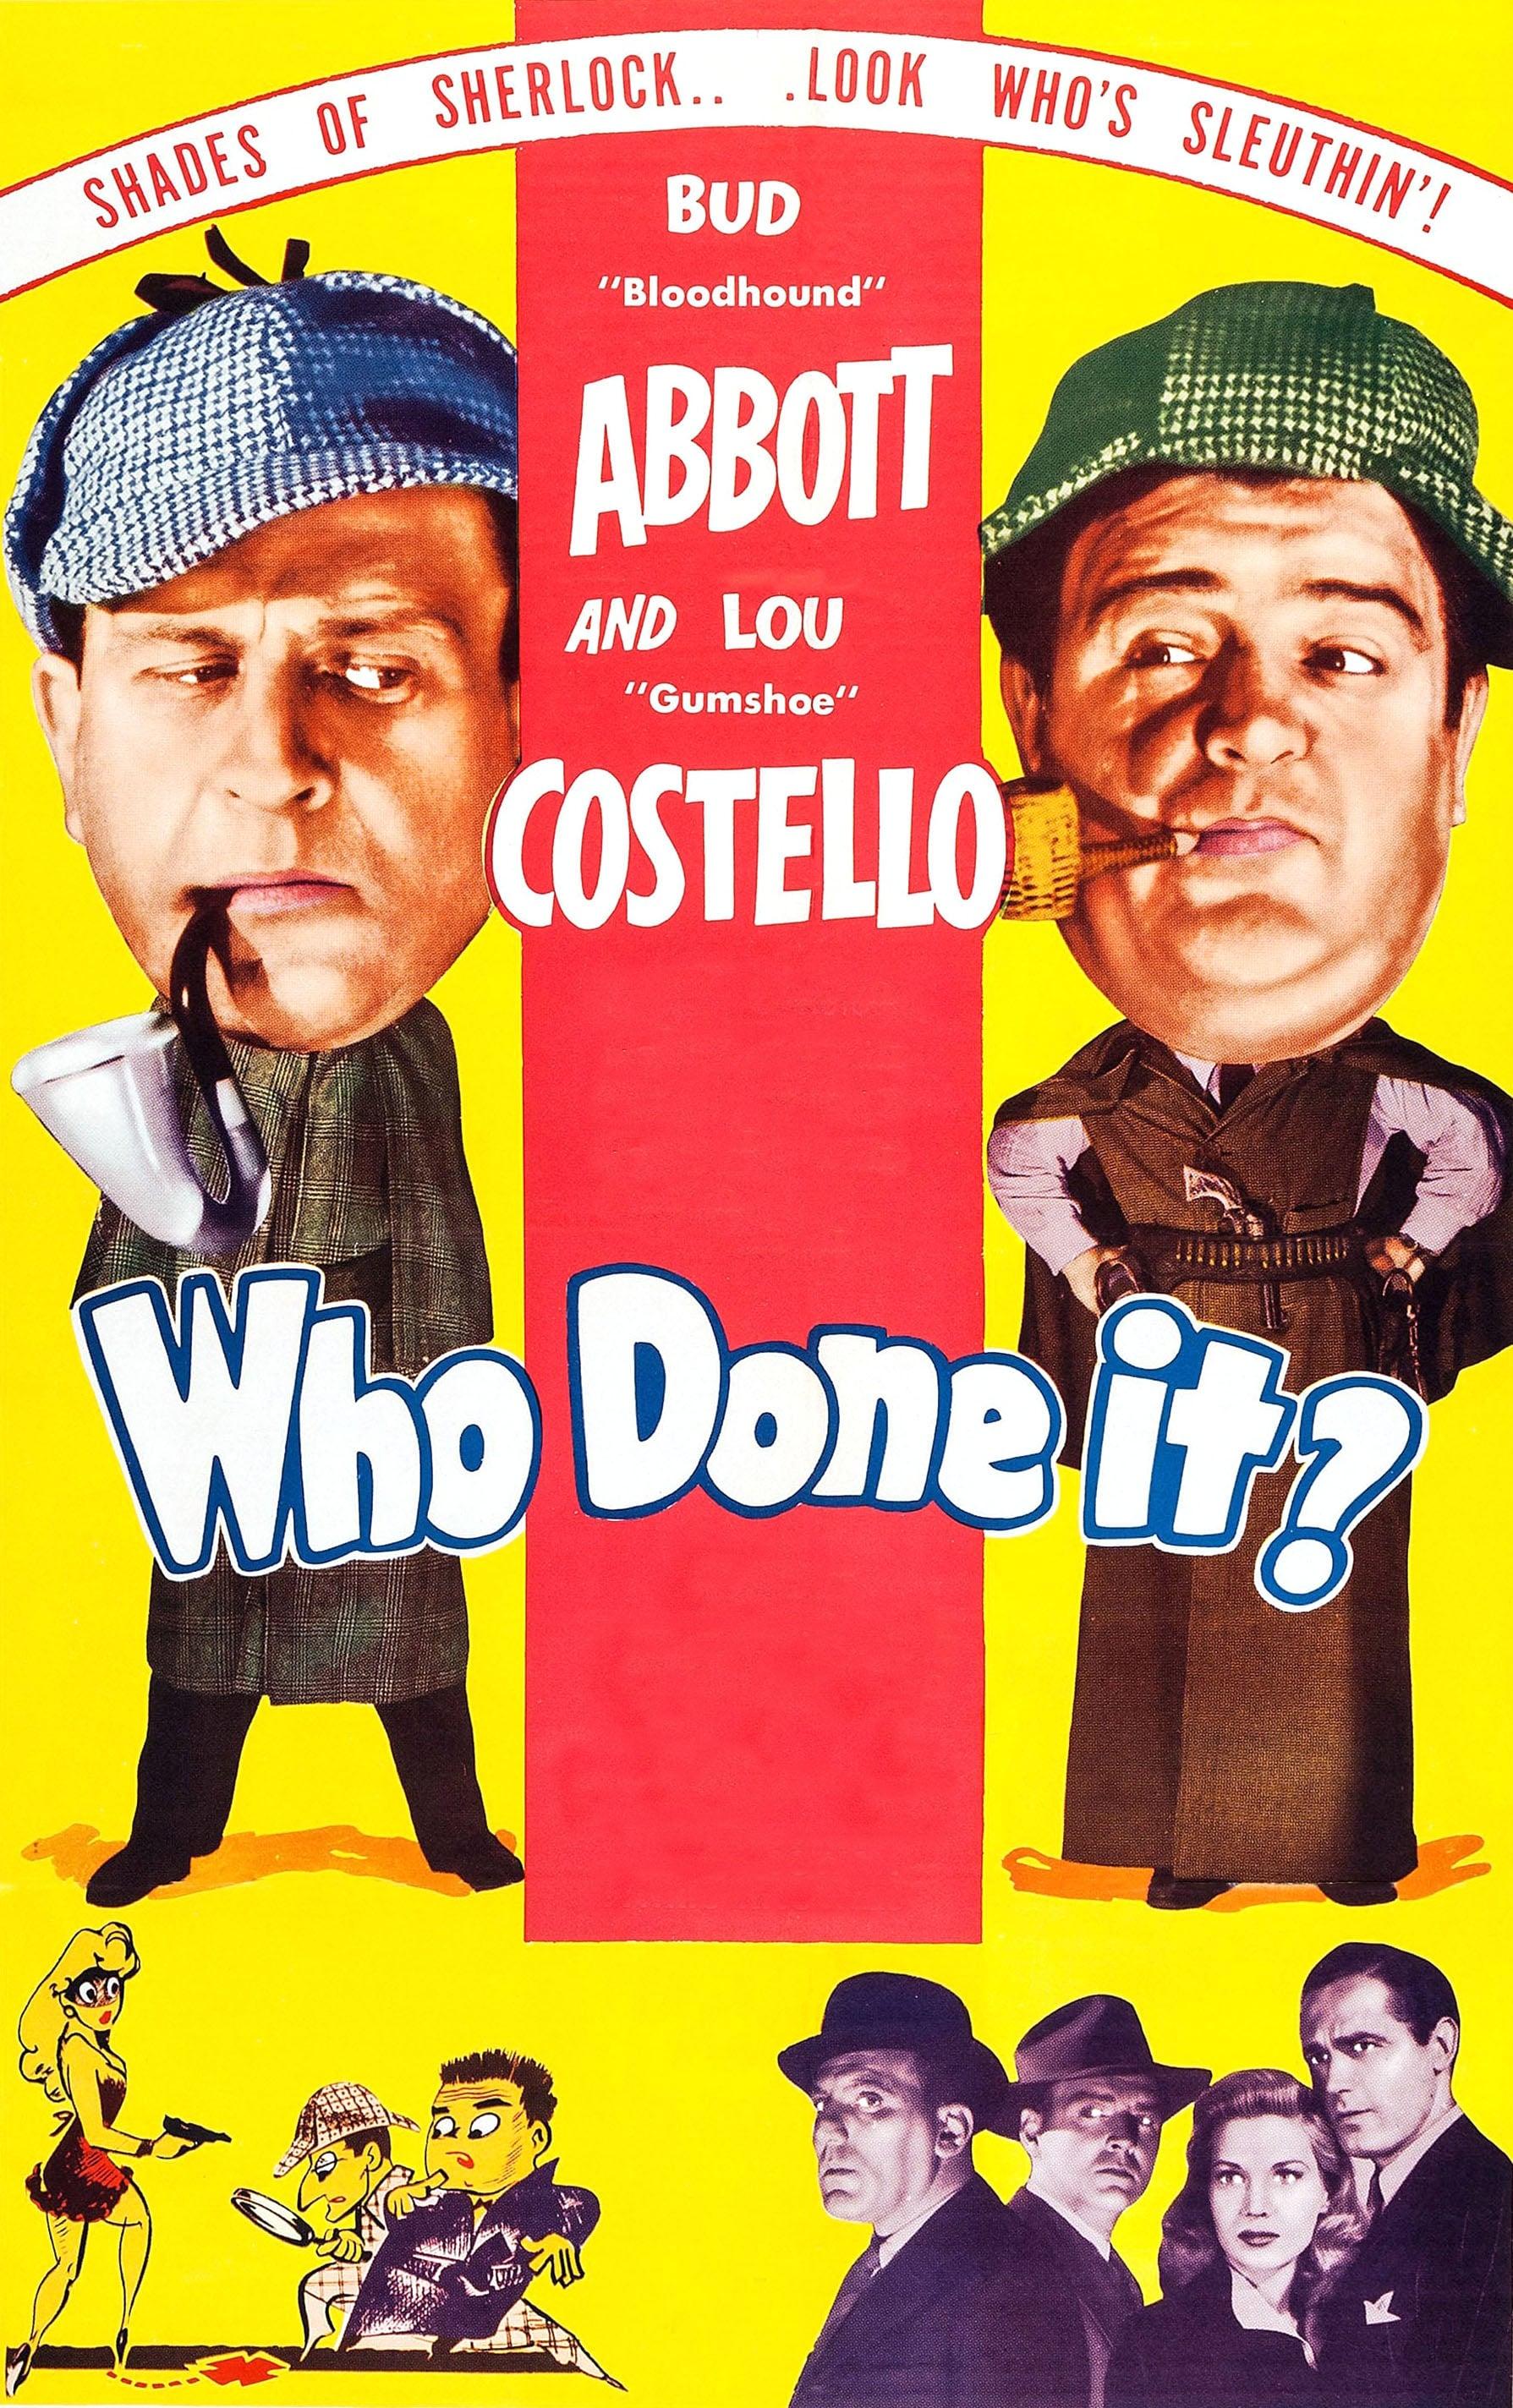 Who Done It? poster